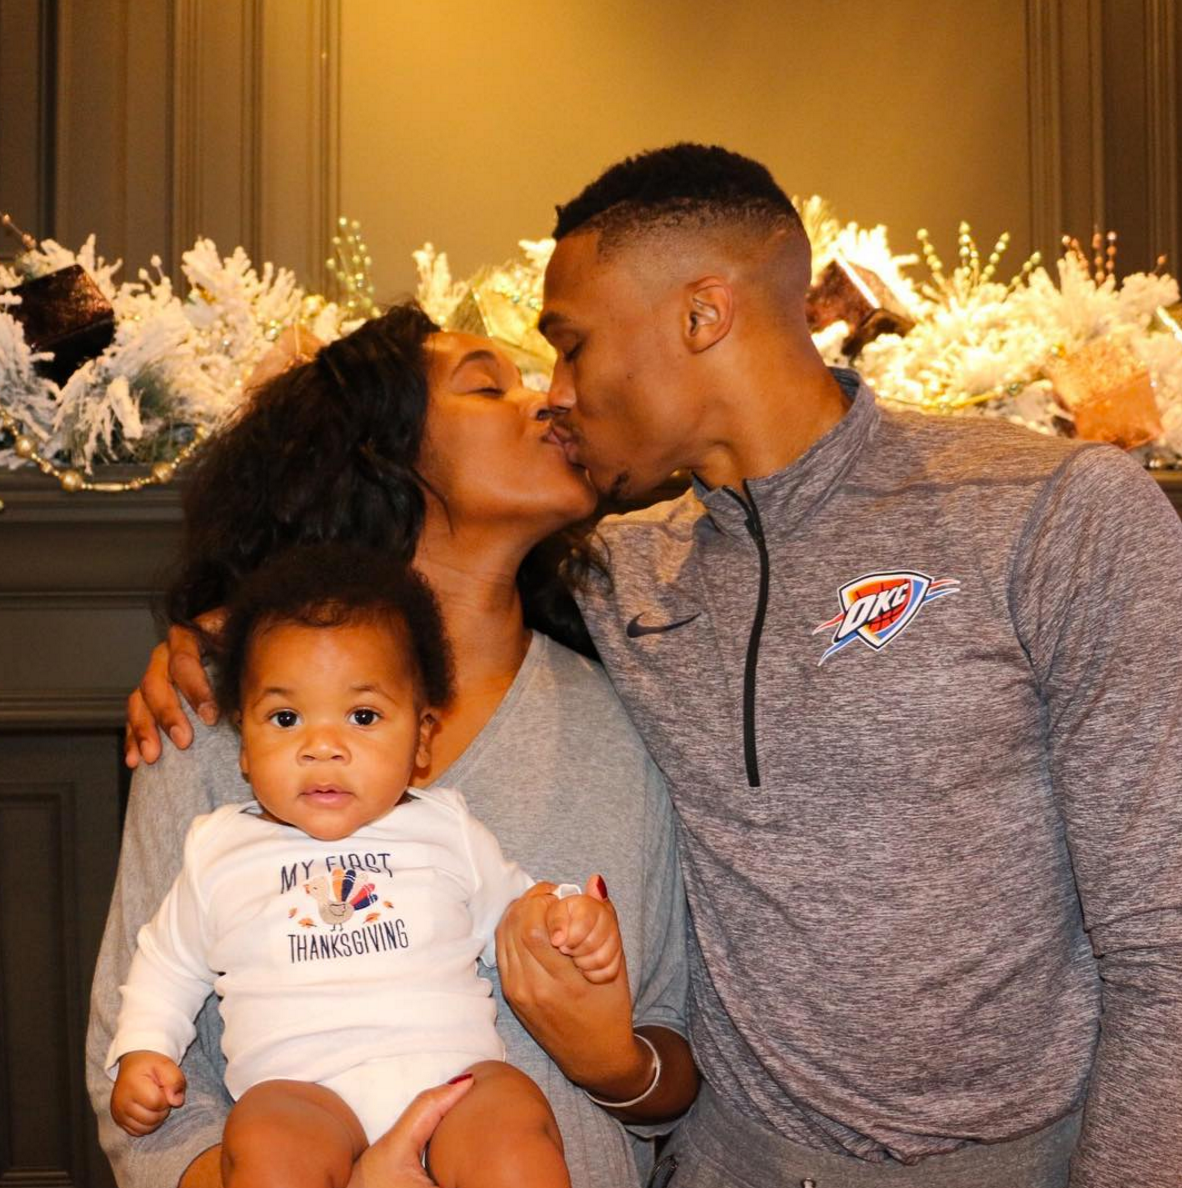 These Photos Of NBA Star Russell Westbrook, His Wife Nina And Their Son Noah Are Black Family Goals
